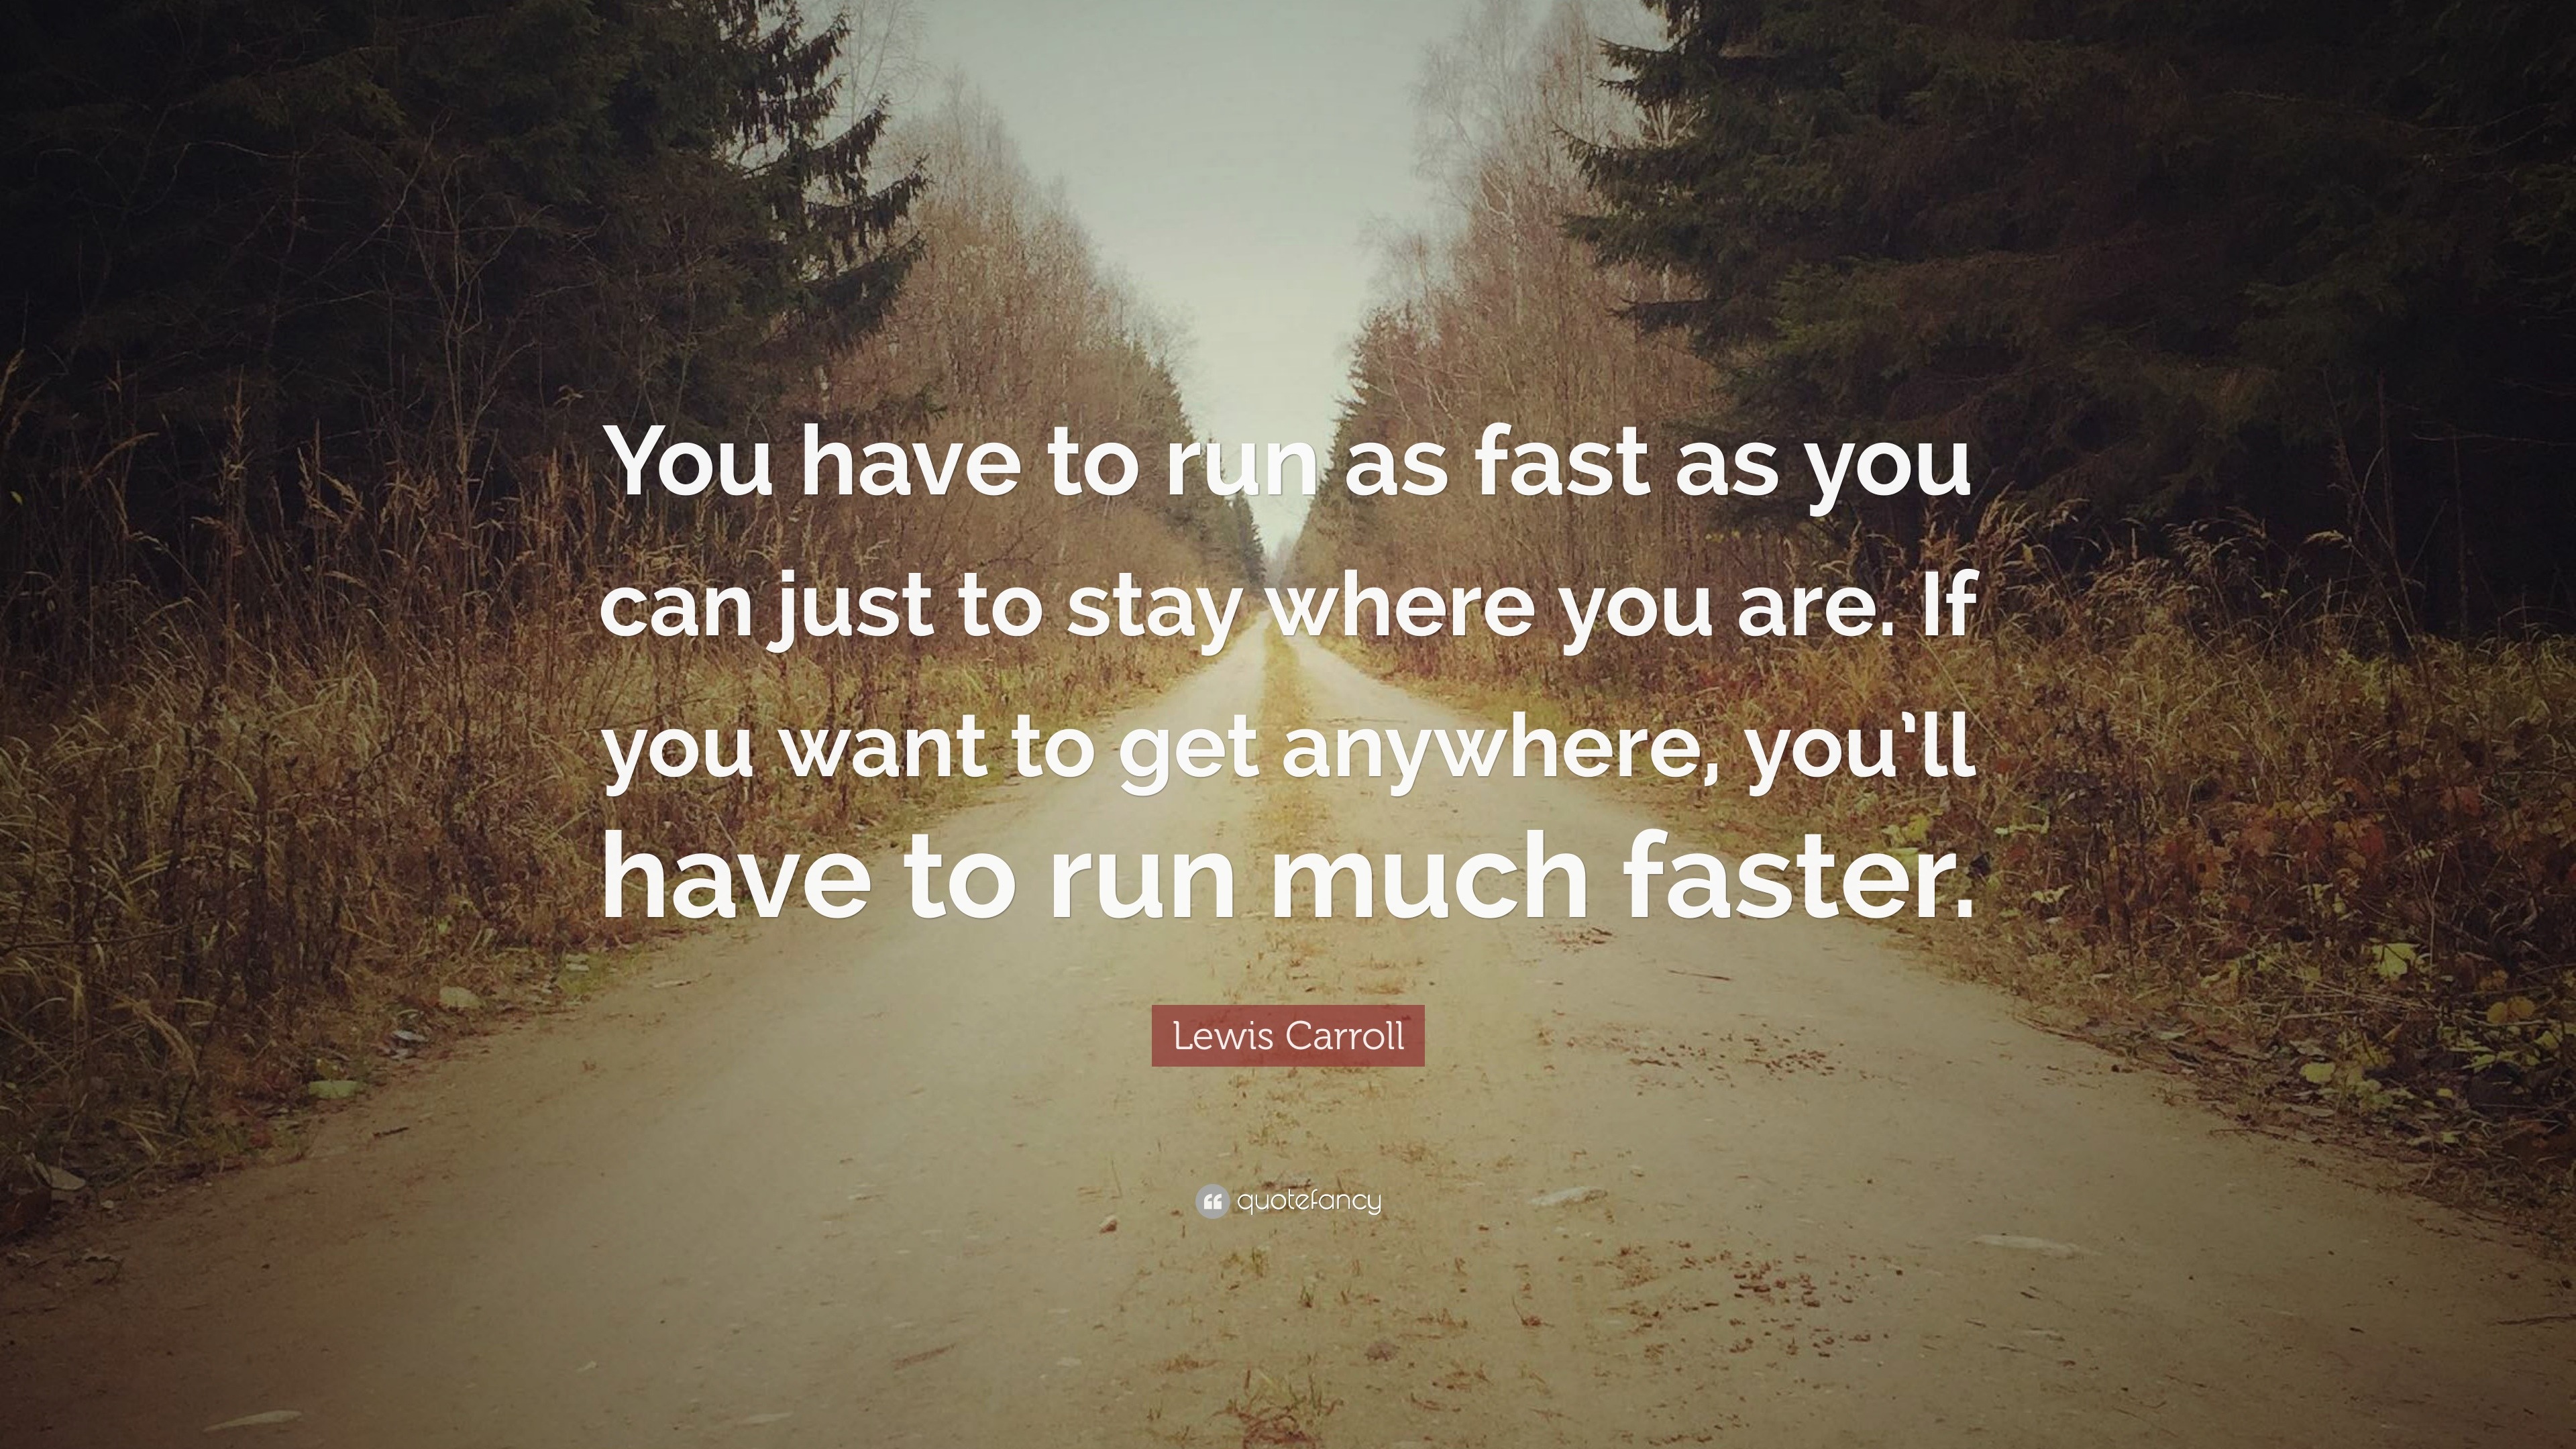 https://quotefancy.com/media/wallpaper/3840x2160/196882-Lewis-Carroll-Quote-You-have-to-run-as-fast-as-you-can-just-to.jpg